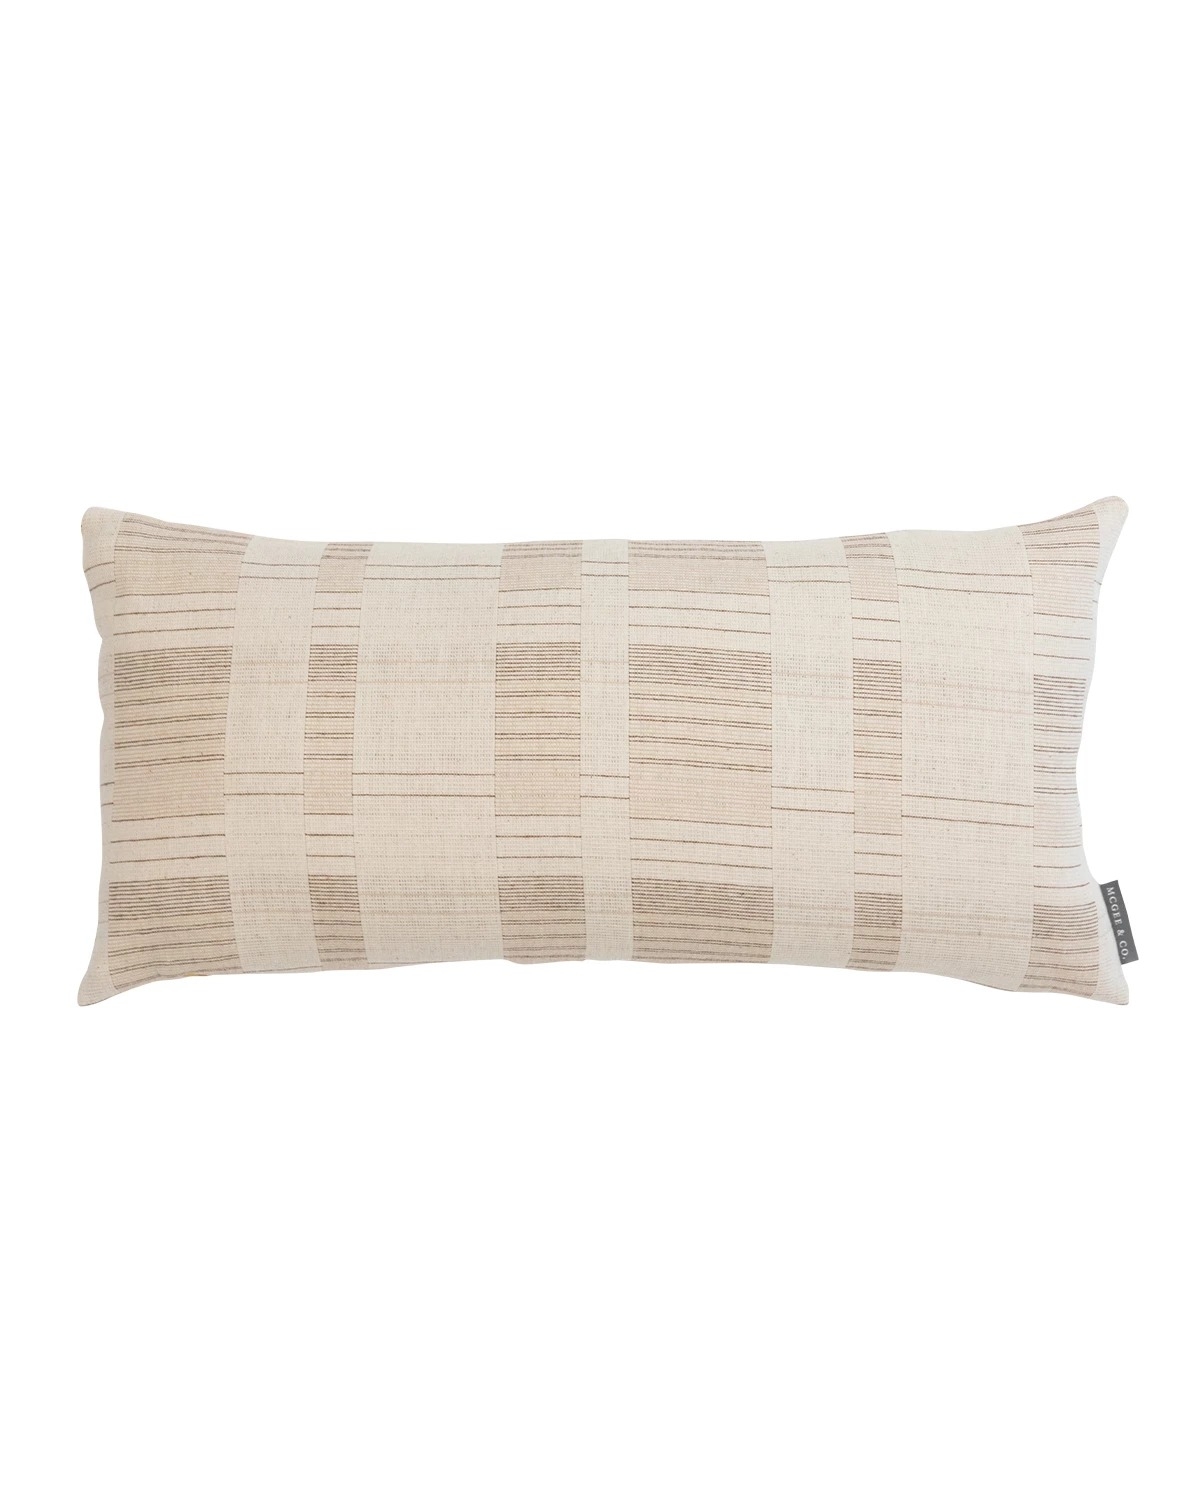 NICOLETTE VINTAGE NO. 1 PILLOW WITHOUT INSERT - 12" x 24" - Image 0